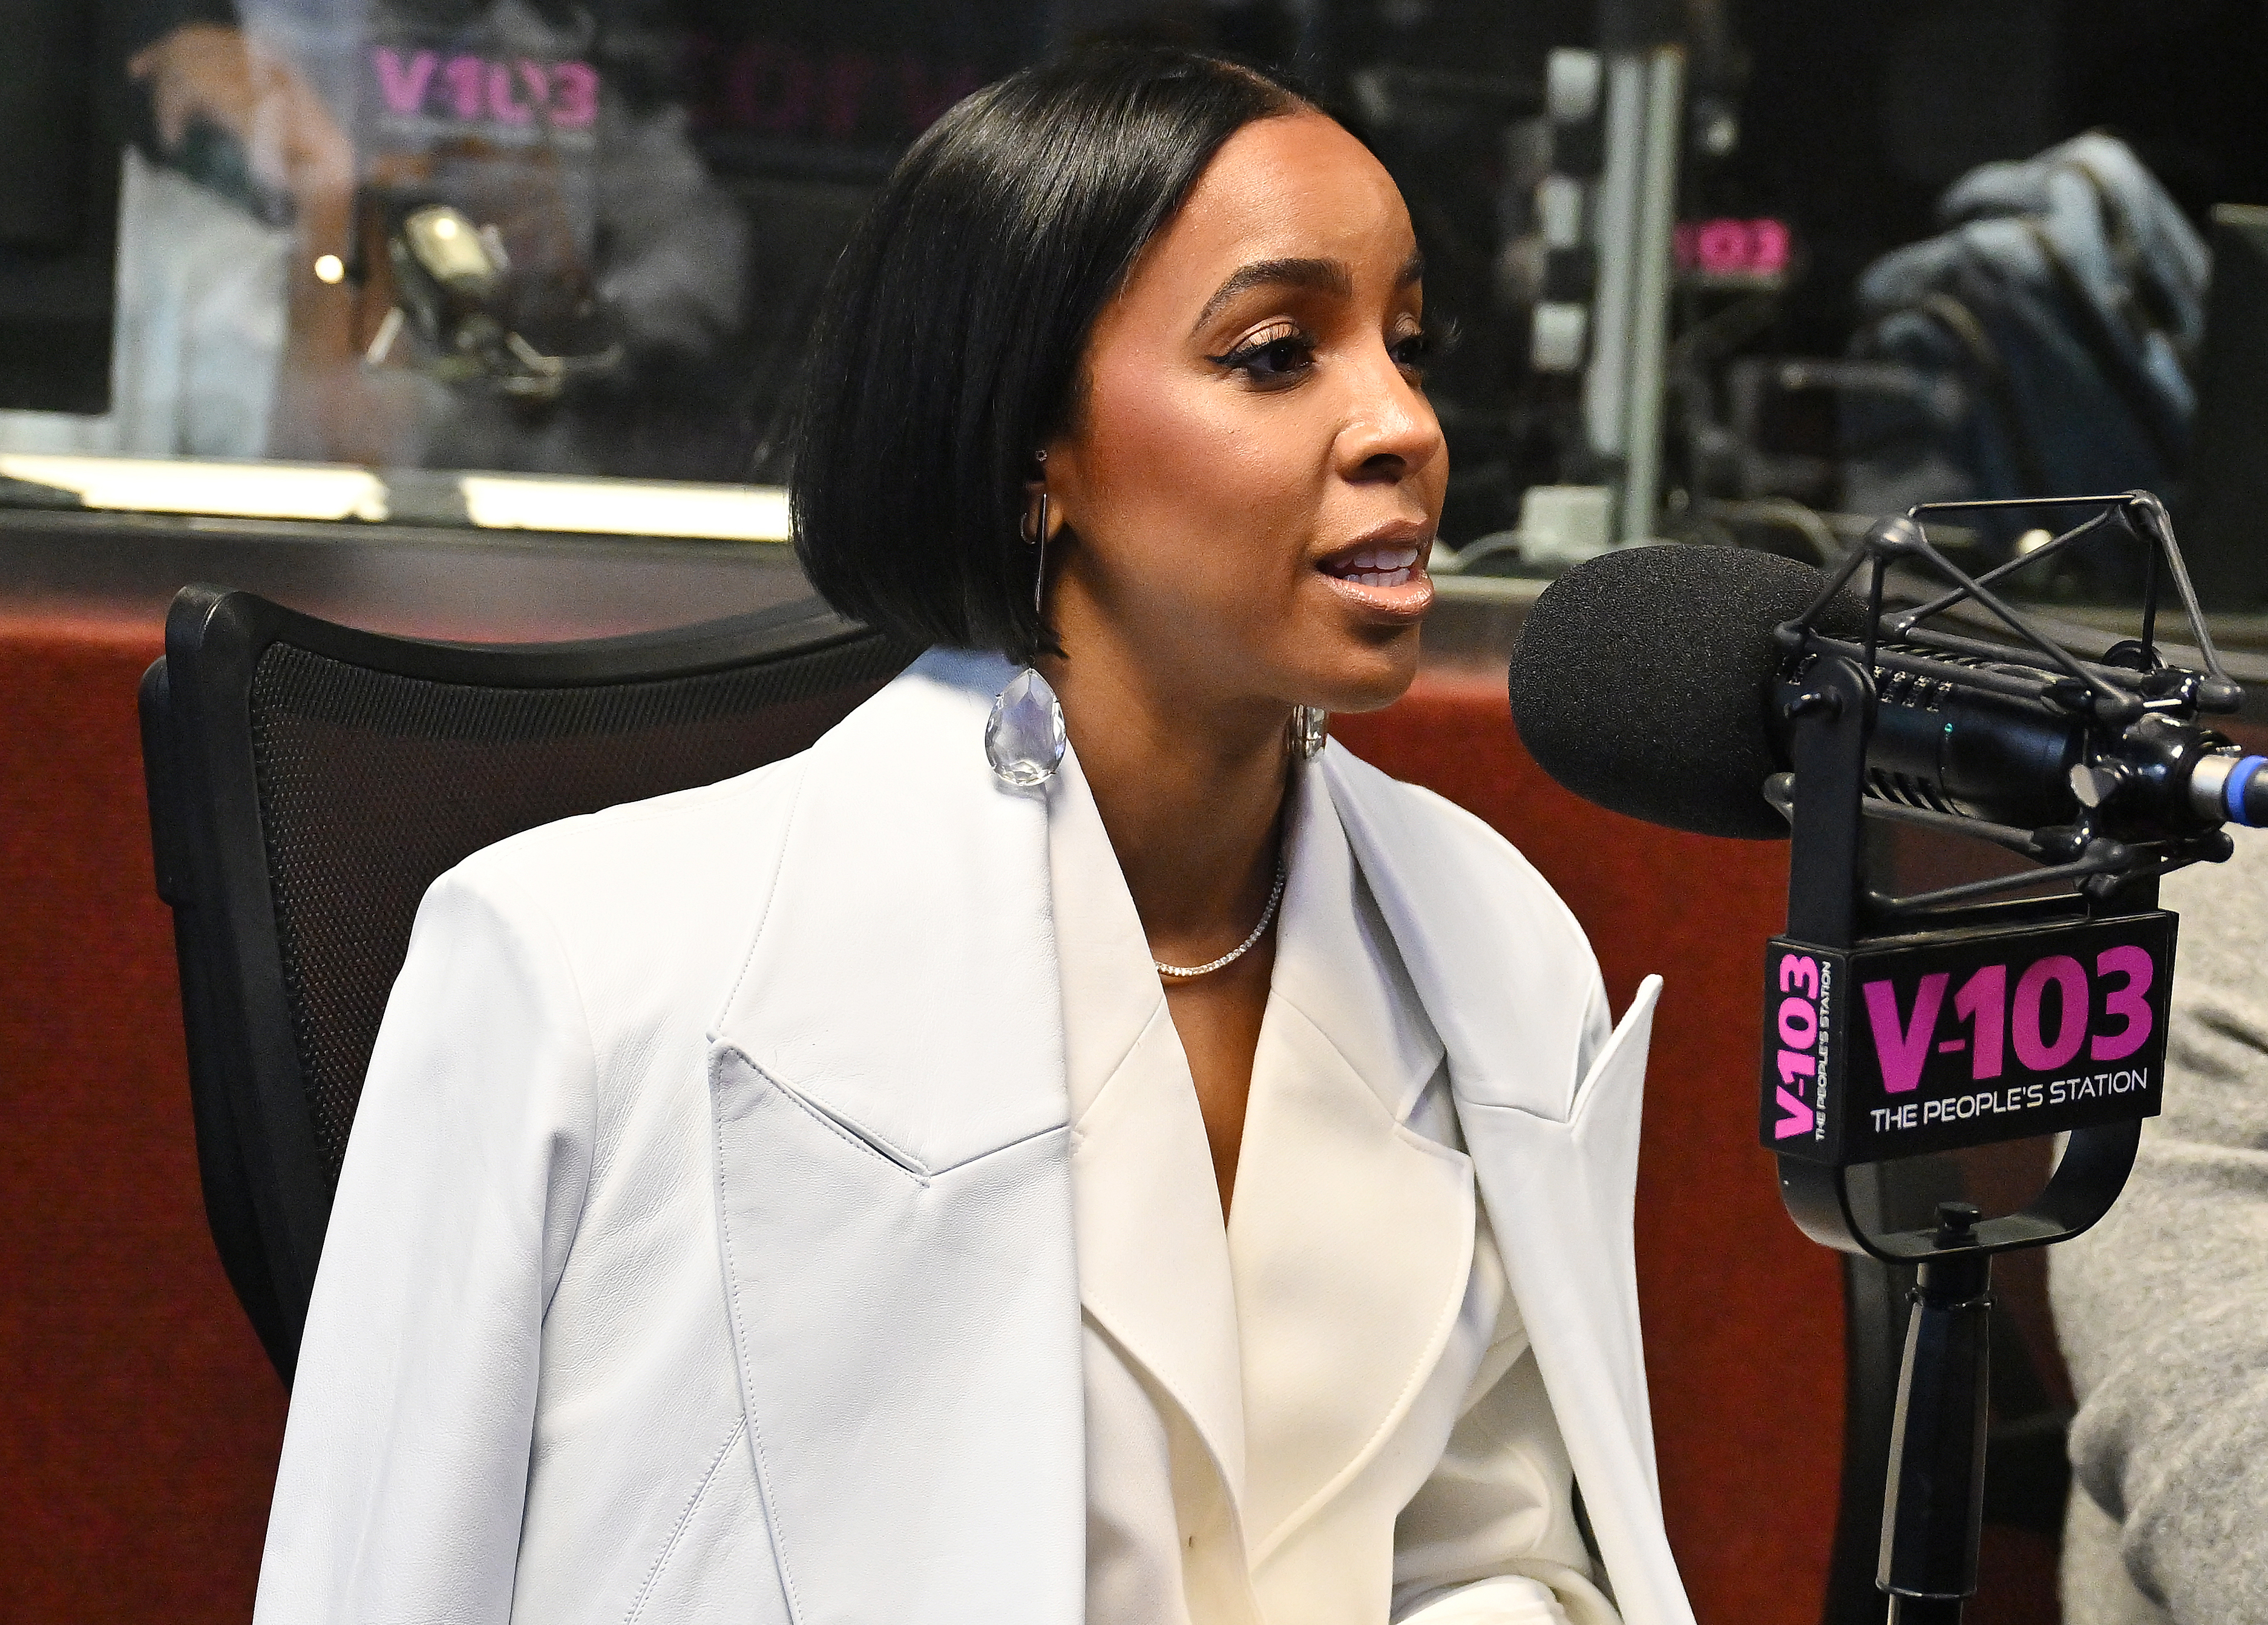 Kelly Rowland in a radio studio, wearing a white blazer, speaking into a microphone